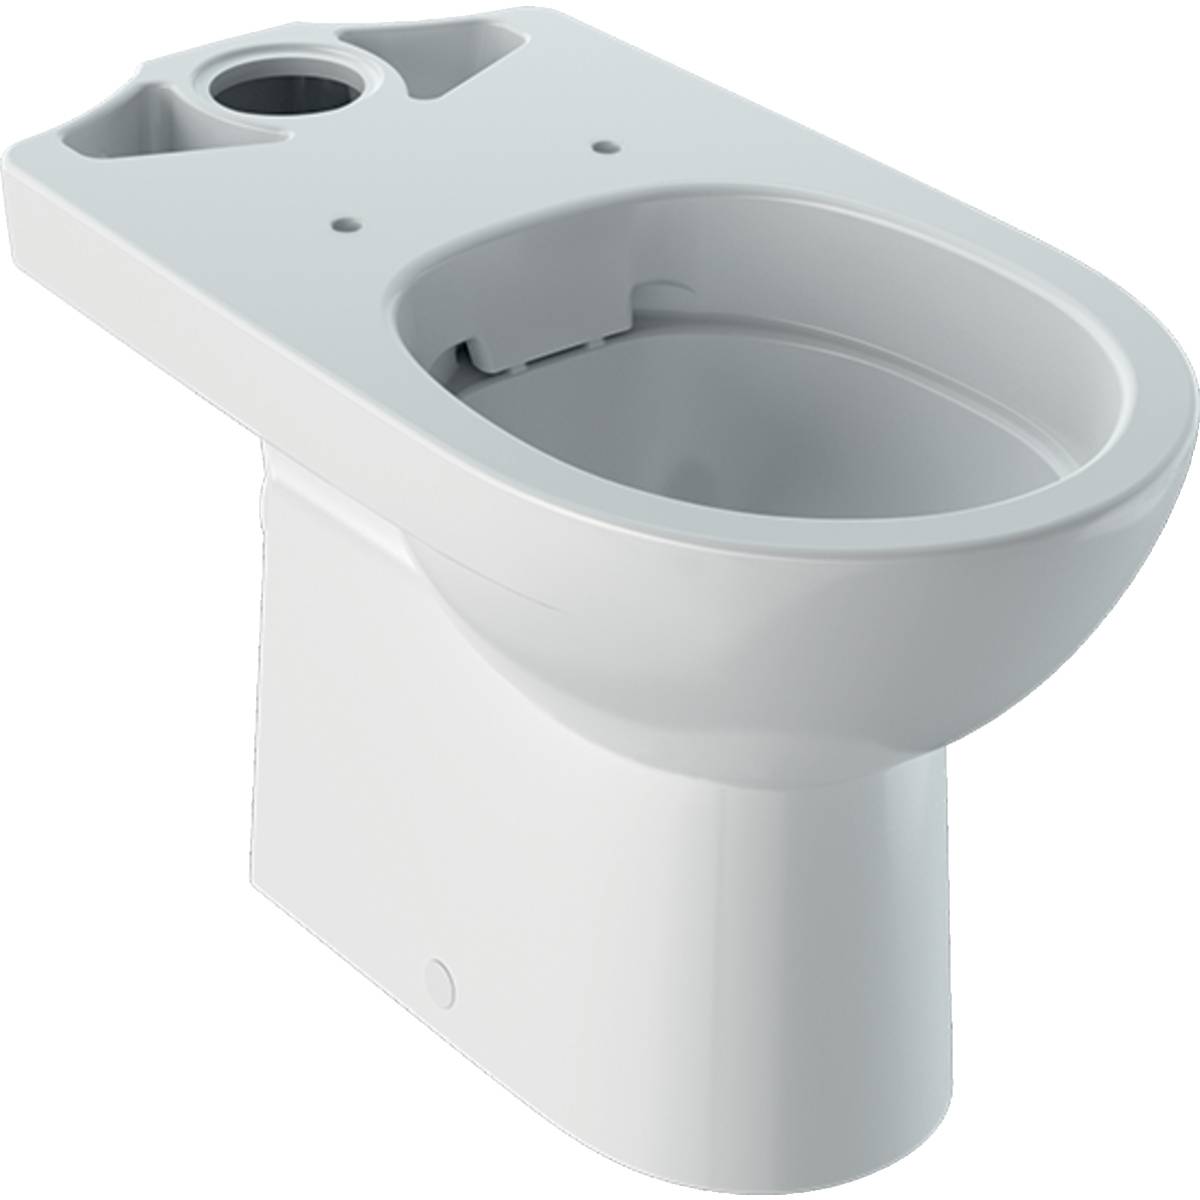 Selnova Floor-Standing WC For Close-Coupled Exposed Cistern, Washdown, Horizontal Outlet, Semi-Shrouded, Rimfree